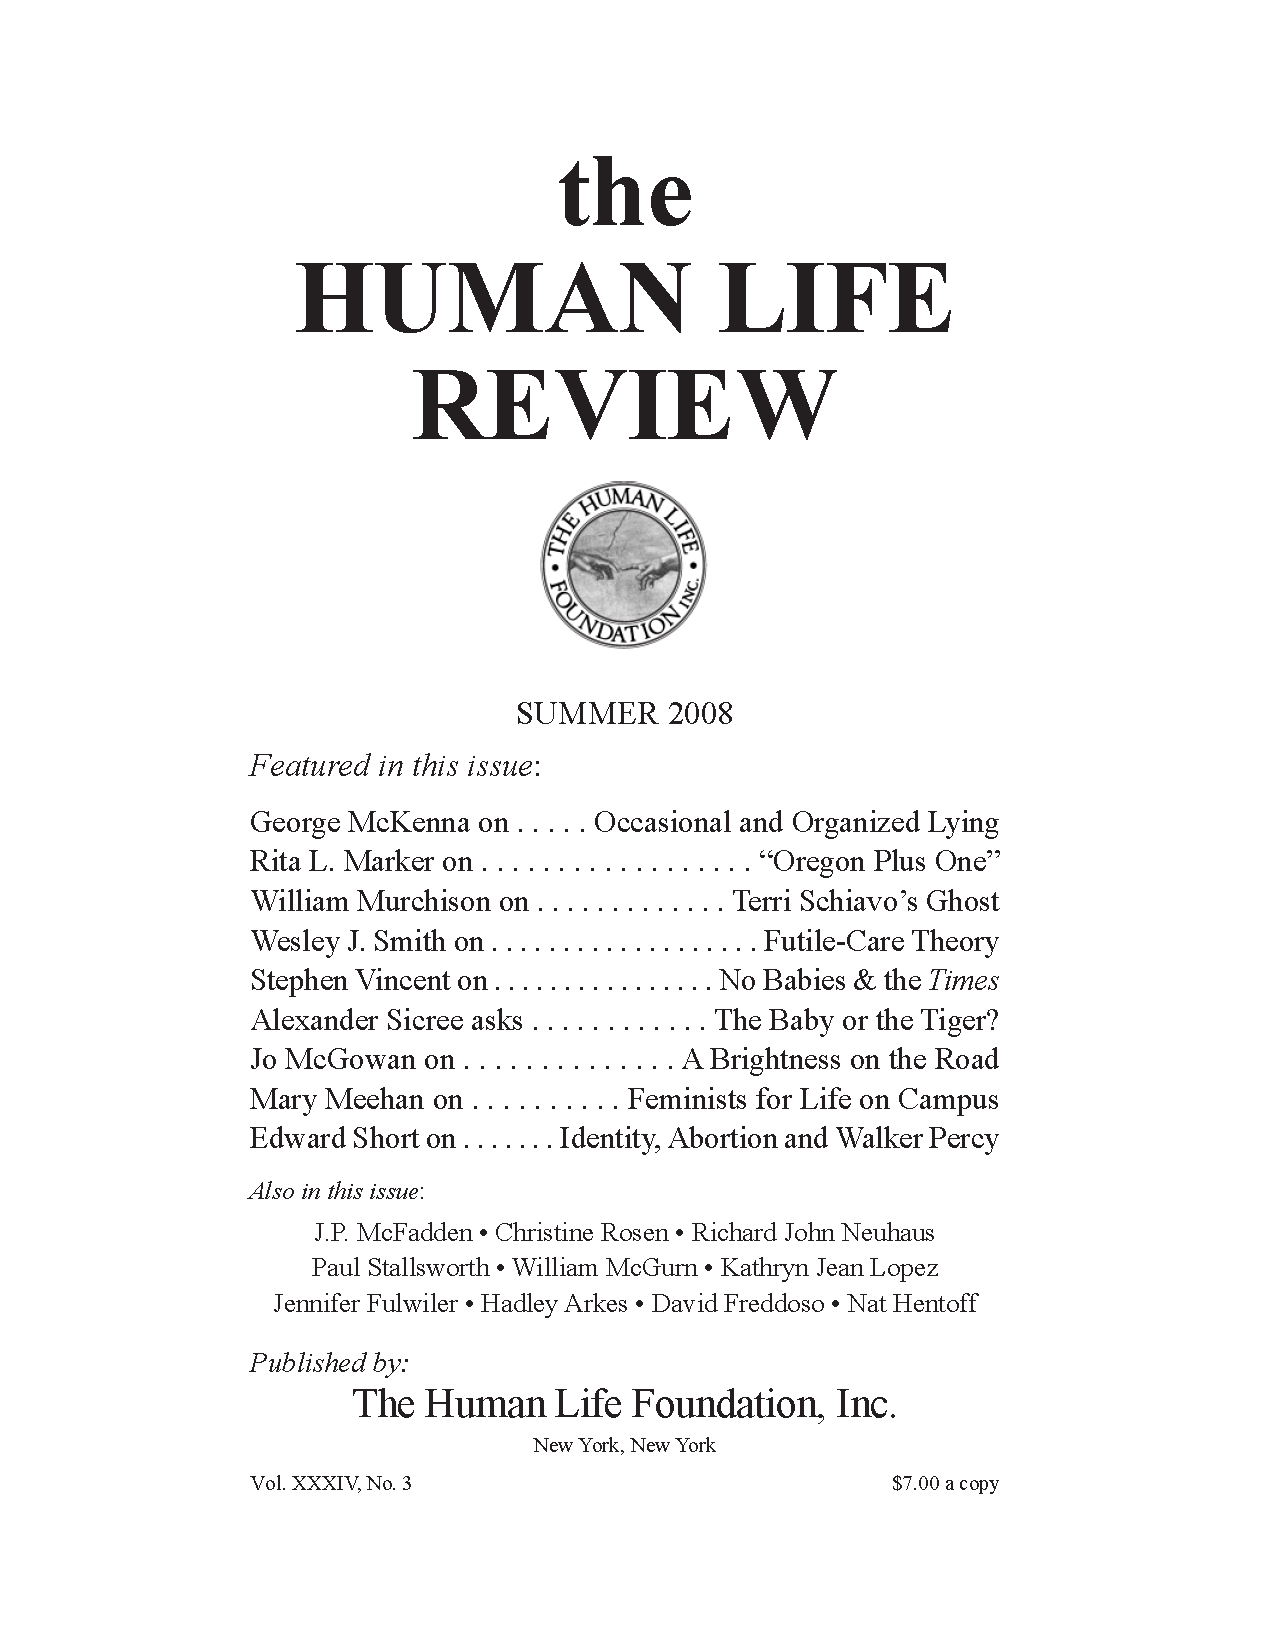 the human life review summer 2008 - the human life review